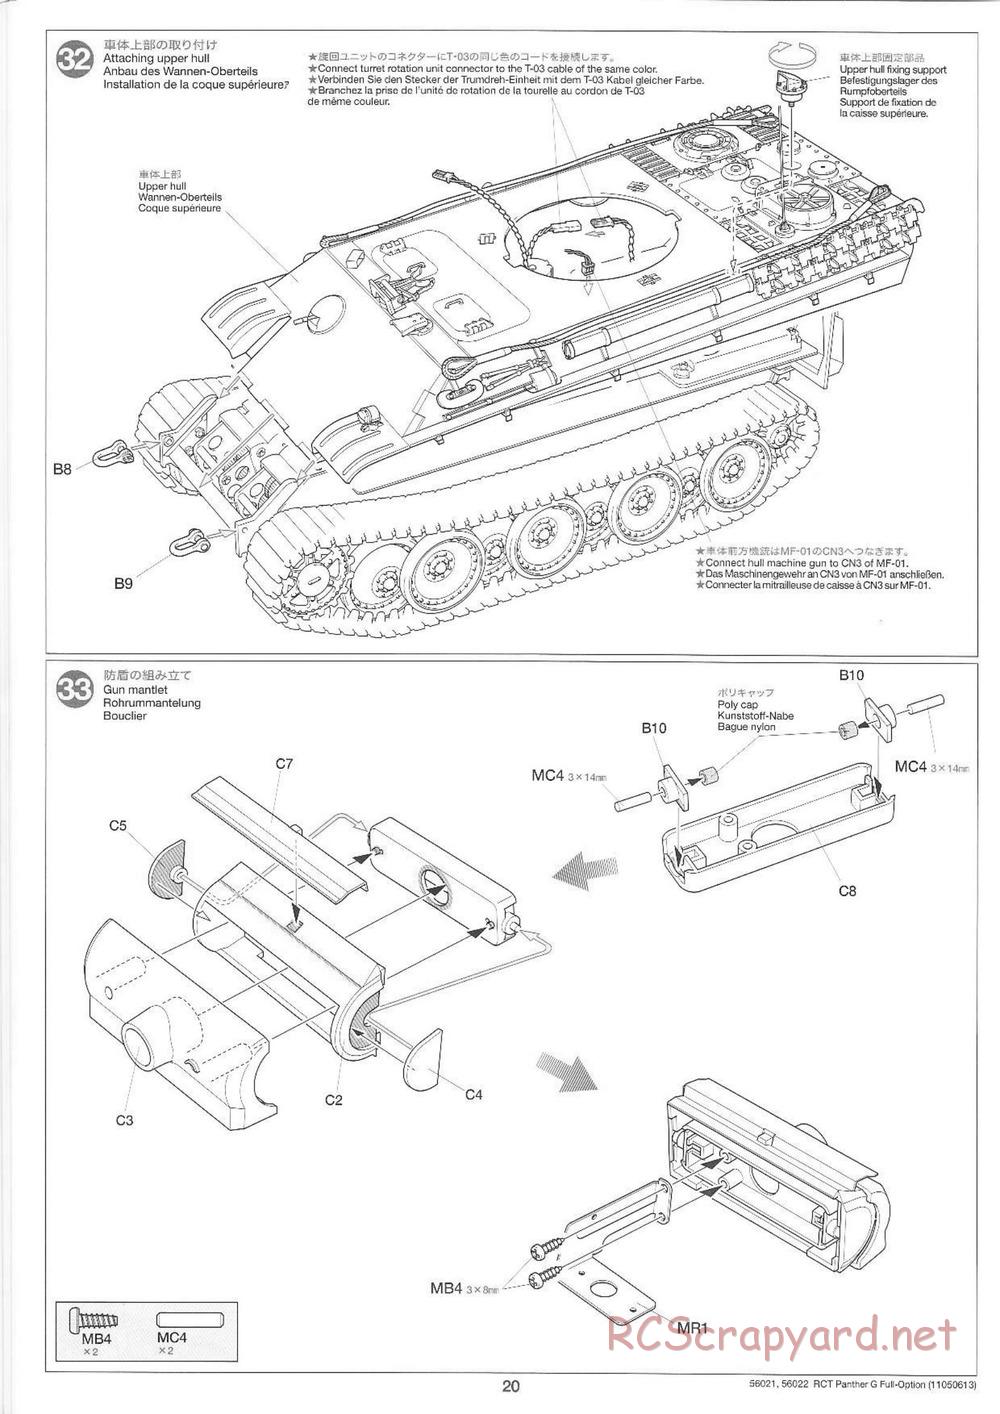 Tamiya - Panther Type G - 1/16 Scale Chassis - Manual - Page 20